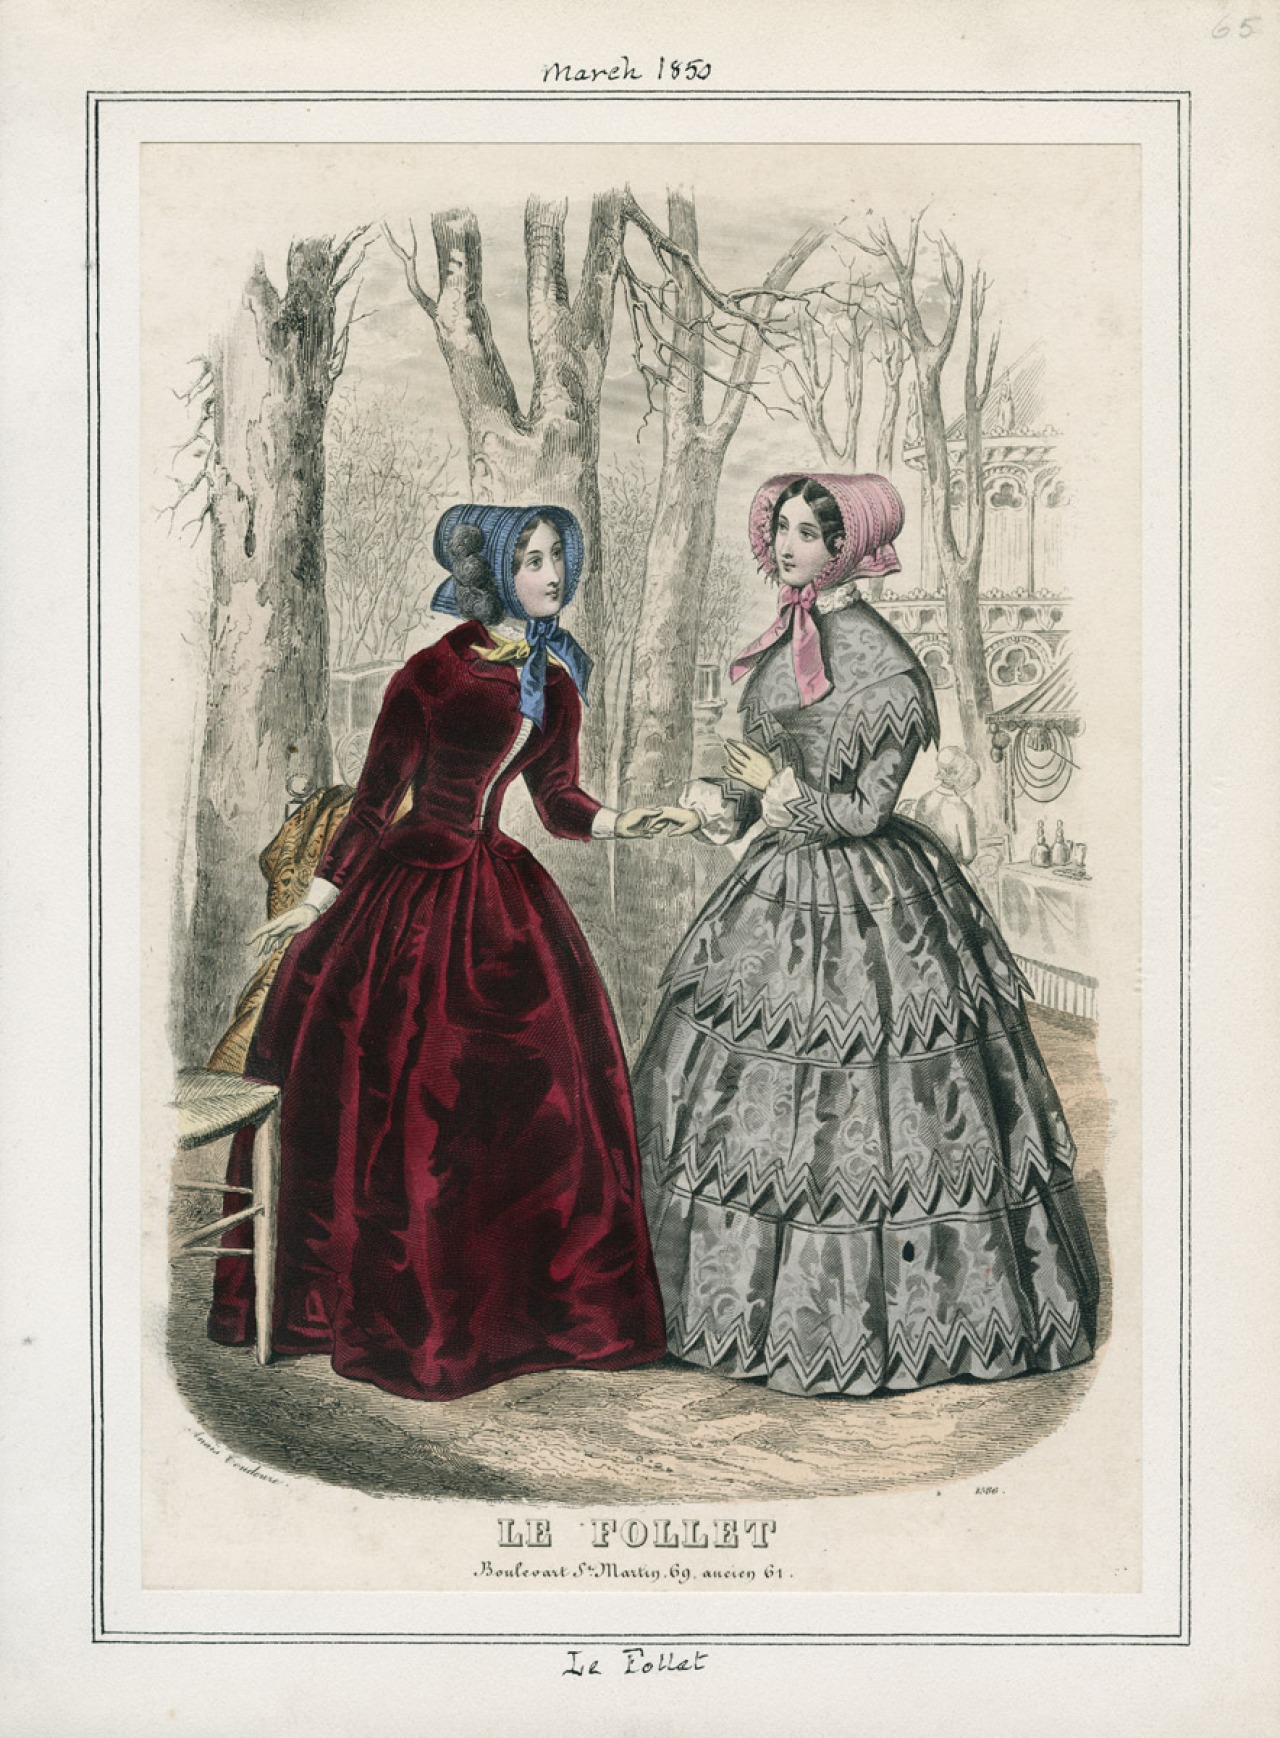 Daywear: 1850s-60s women  Fashion and Decor: A Cultural History